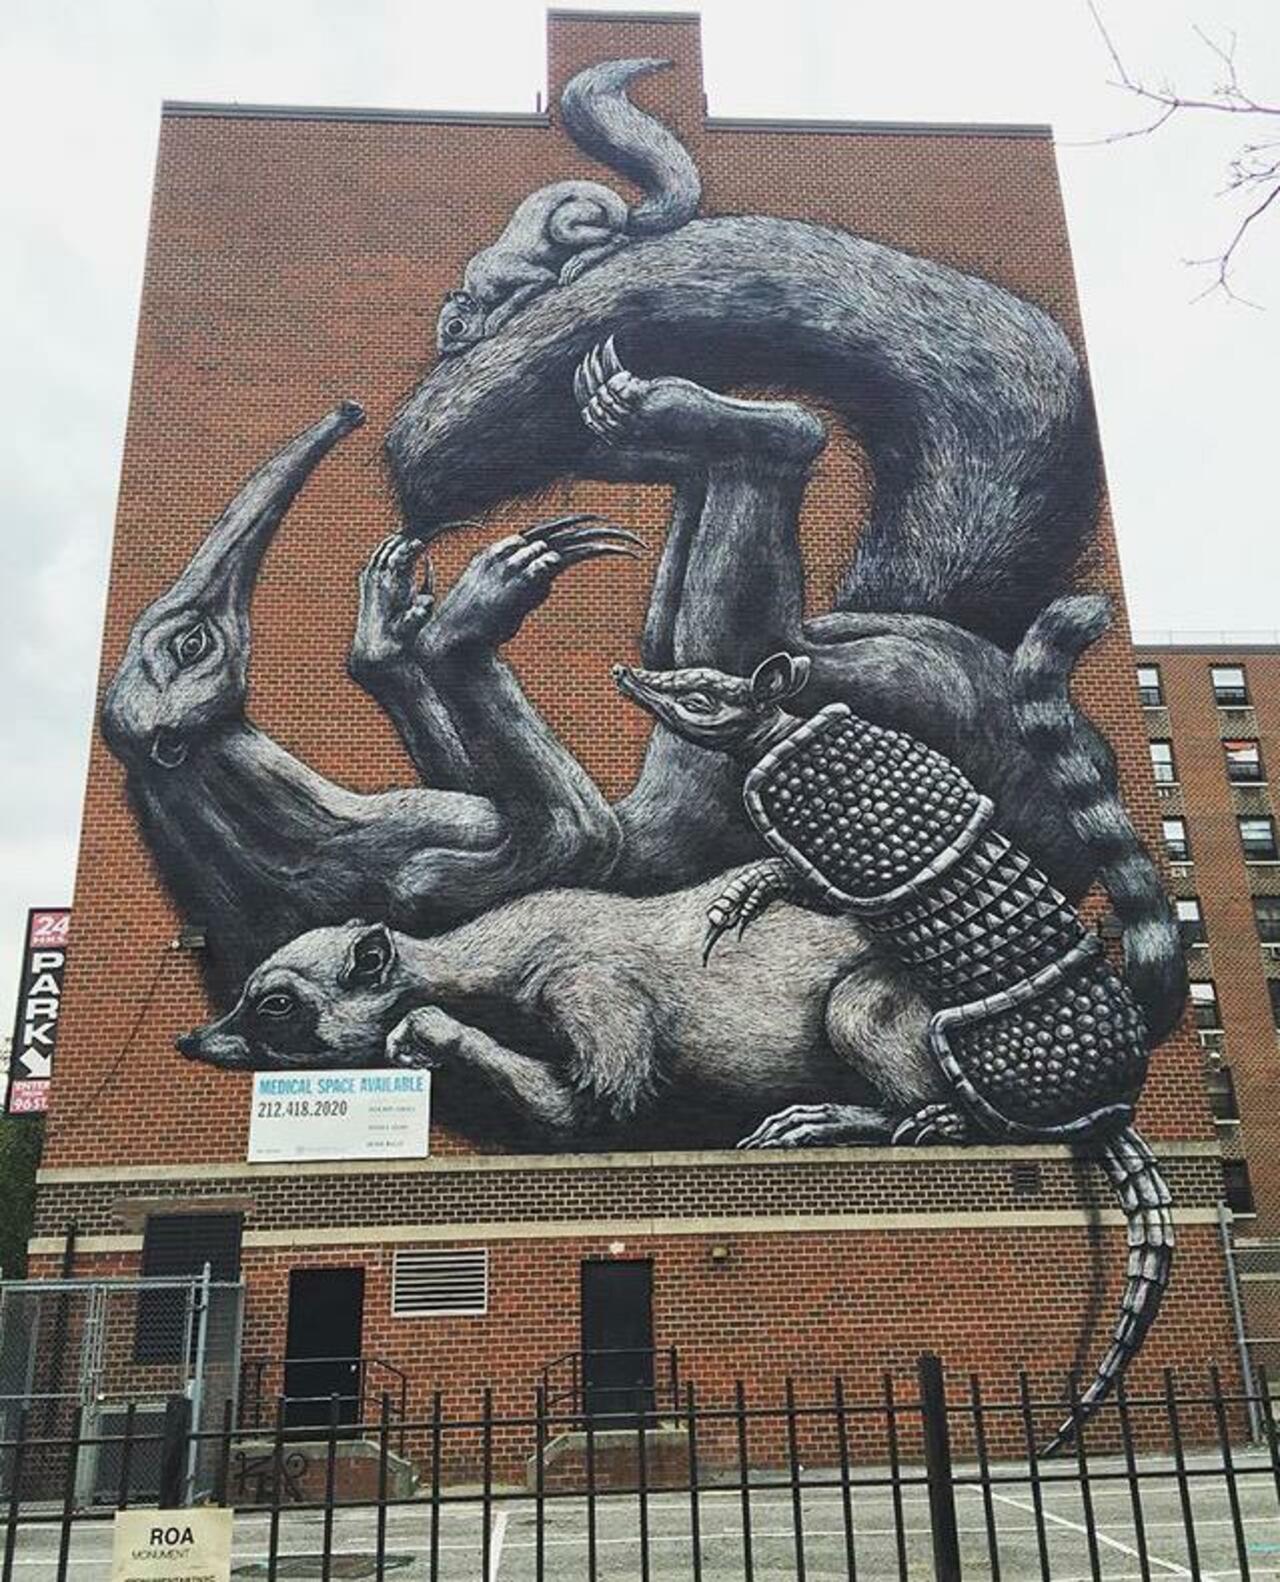 The completed new large scale Street Art wall by ROA in NYC

#art #graffiti #mural #streetart http://t.co/ygXKfj8YJr